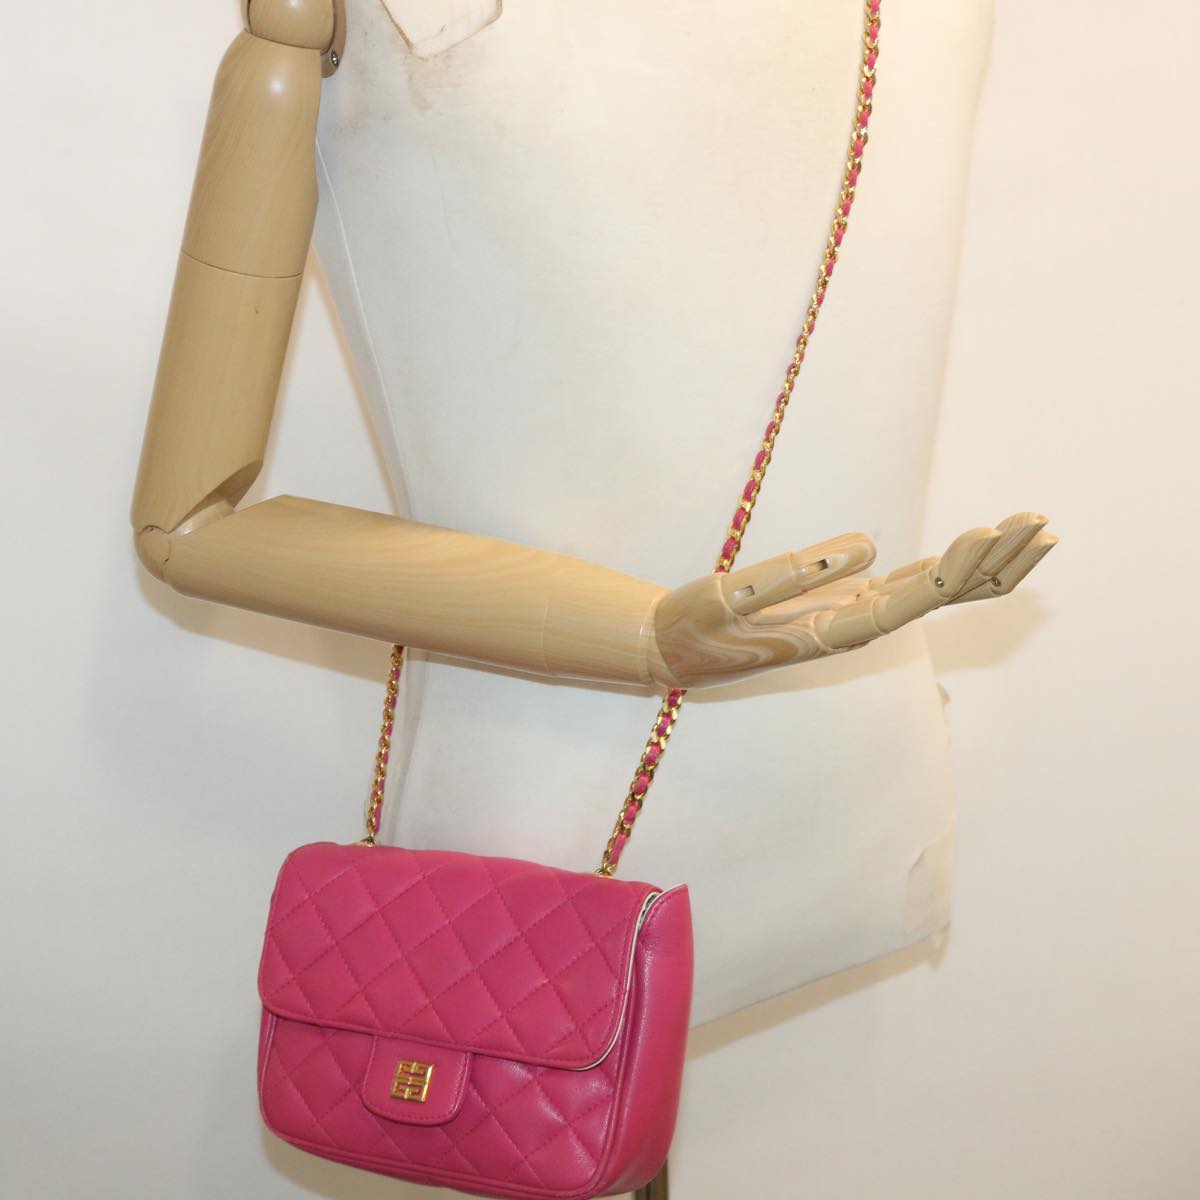 GIVENCHY Matelasse Chain Shoulder Bag Leather Pink Auth am3621